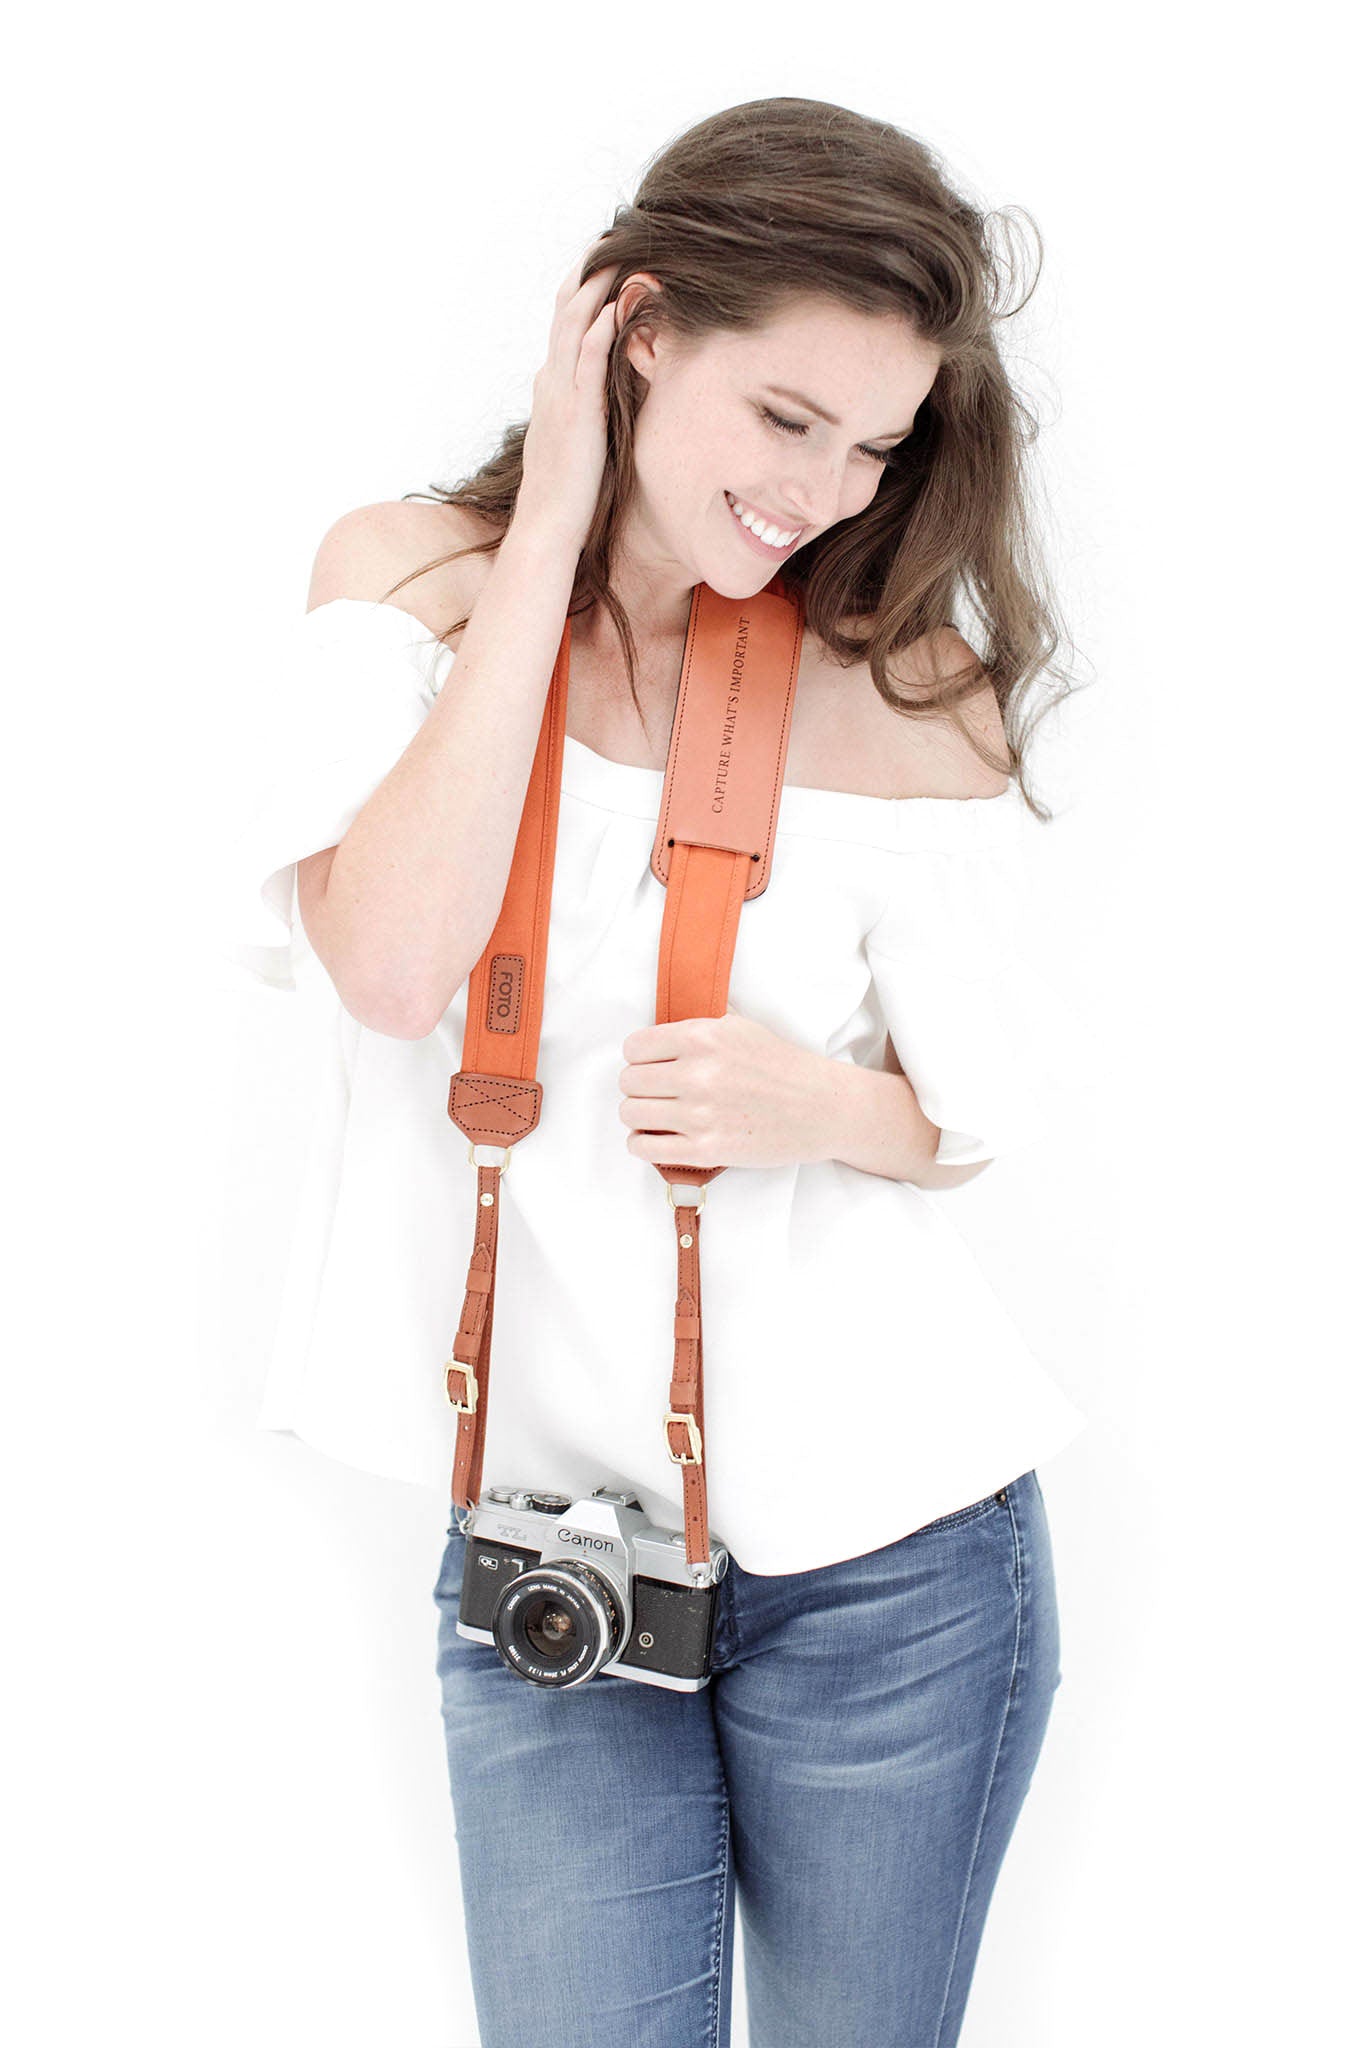 FOTO | Sweet Potato Fotostrap - a burnt orange canvas and genuine leather camera strap that can be personalized with a monogram or business logo, making it the perfect personalized gift! 